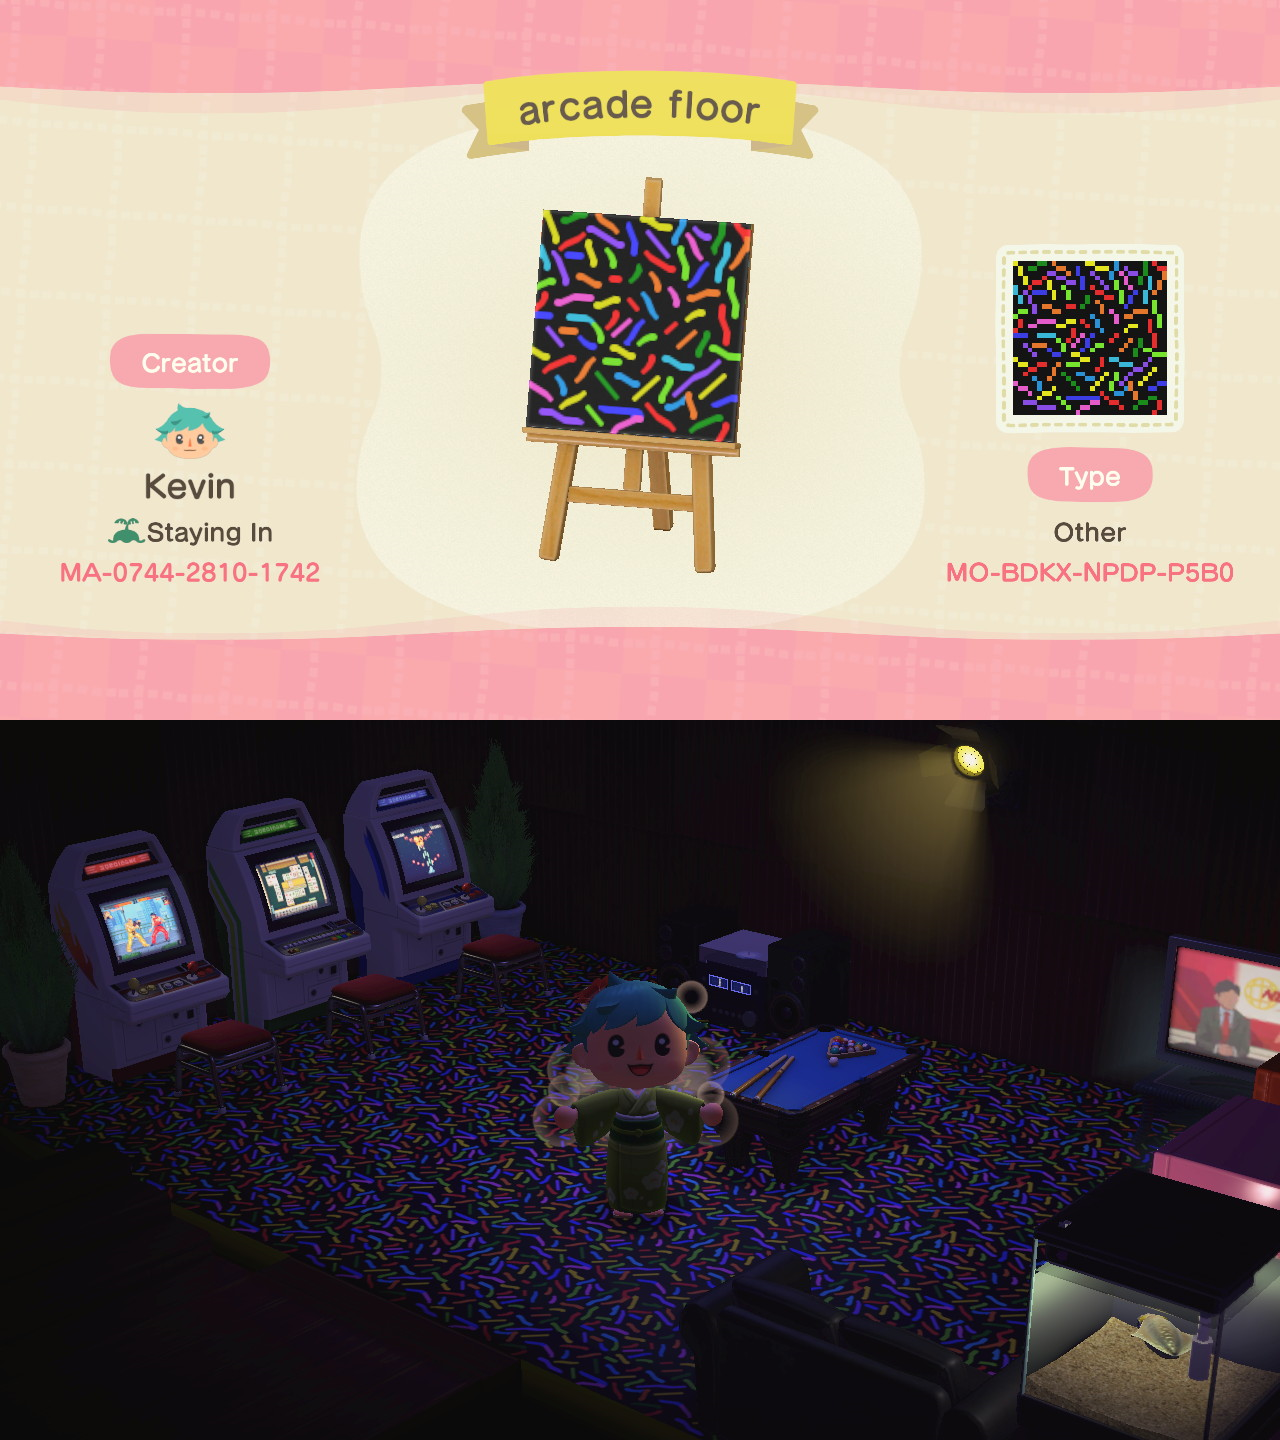 Animal Crossing I made this floor for my basement arcade